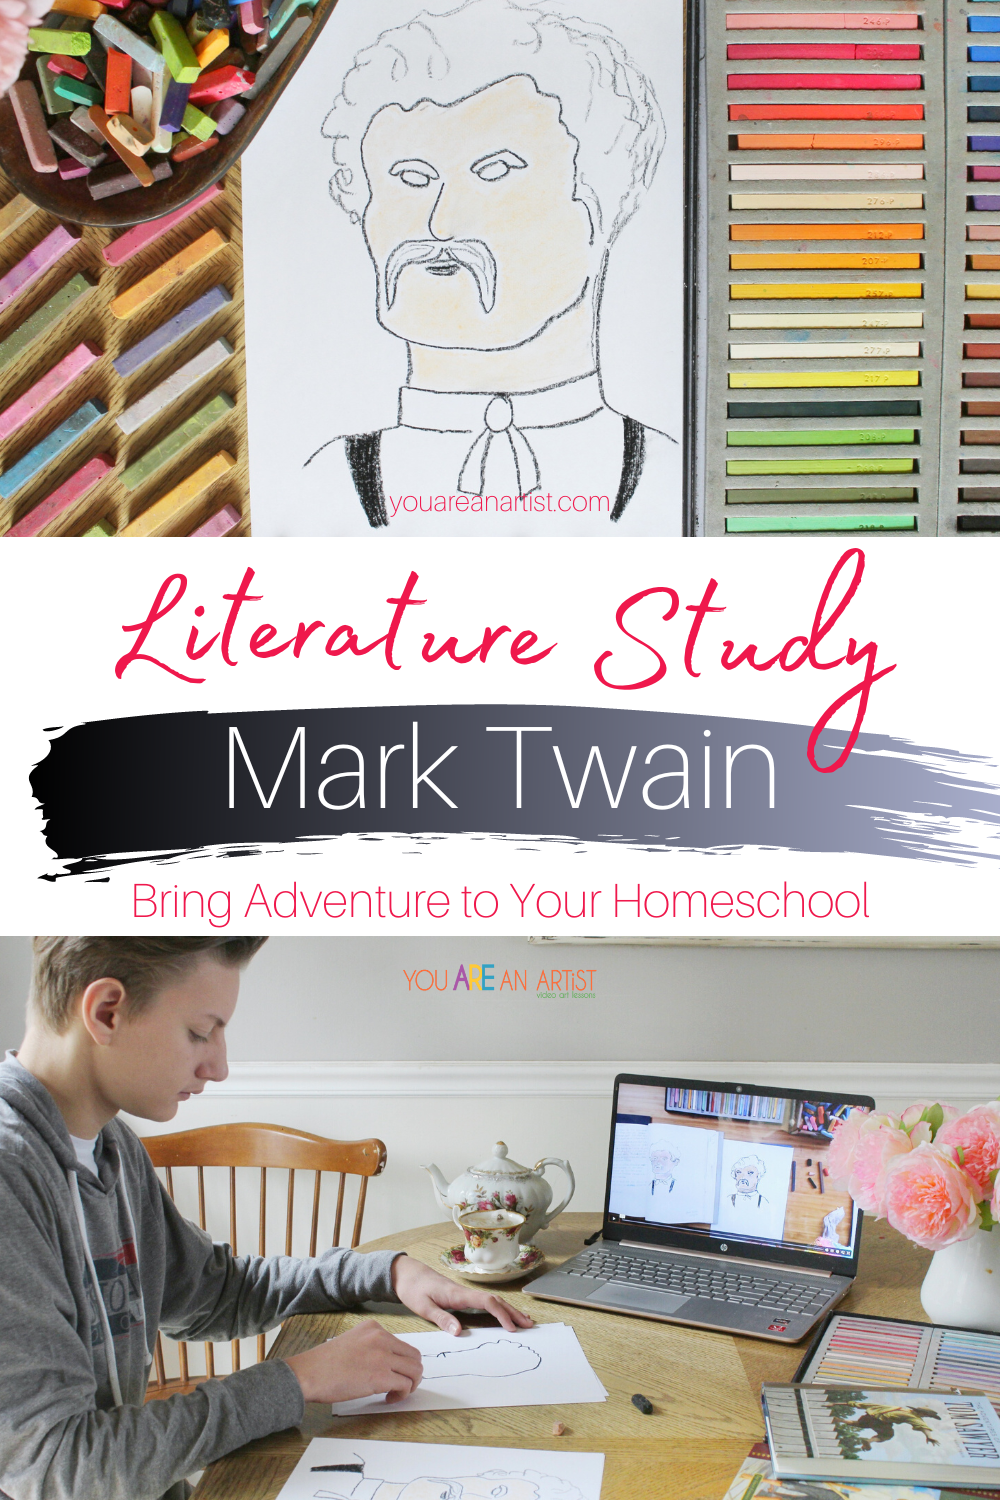 Mark Twain Literature Study: Bring Adventure To Your Homeschool - Are you doing a Mark Twain literature study in your homeschool? If you are reading any of Mark Twain's books then be sure to check out Nana's Mark Twain video art lesson! #YouAREAnArtist #chalkpastel #homeschoolart #MarkTwain #literaturestudy